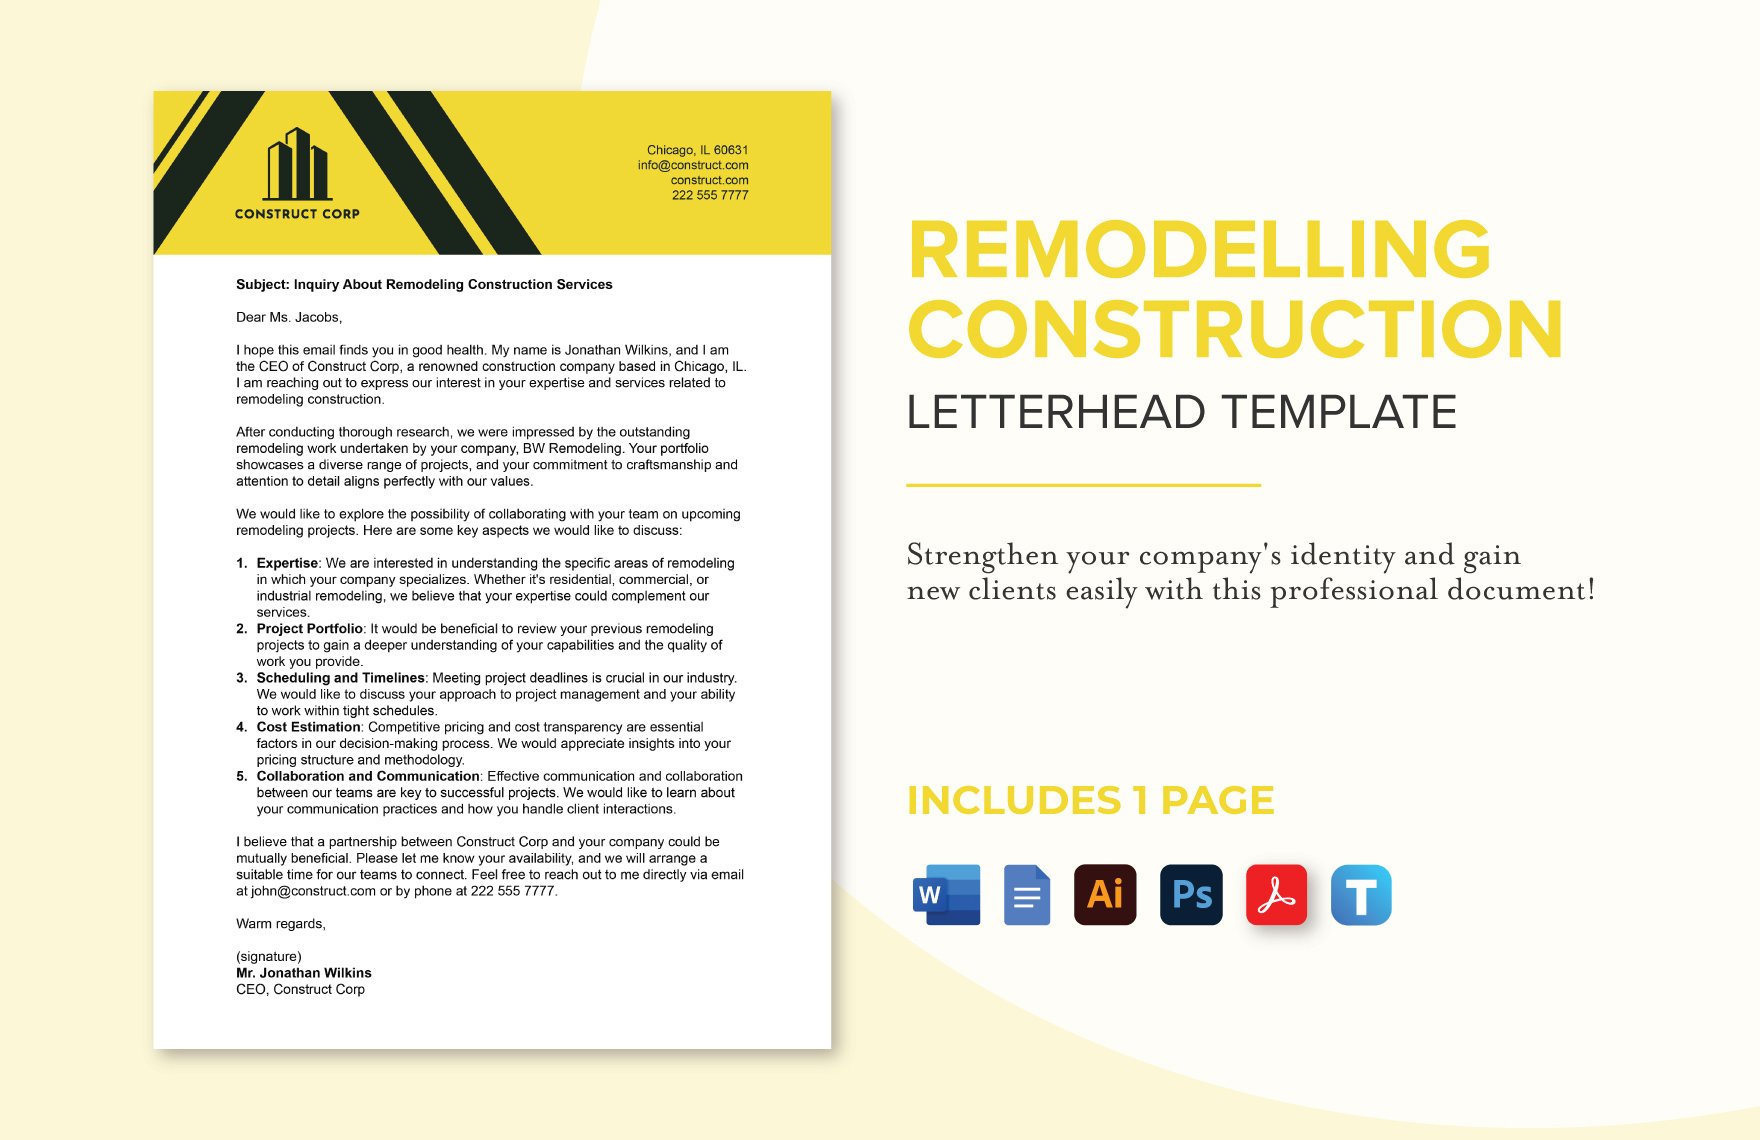 Remodeling Construction Letterhead Template